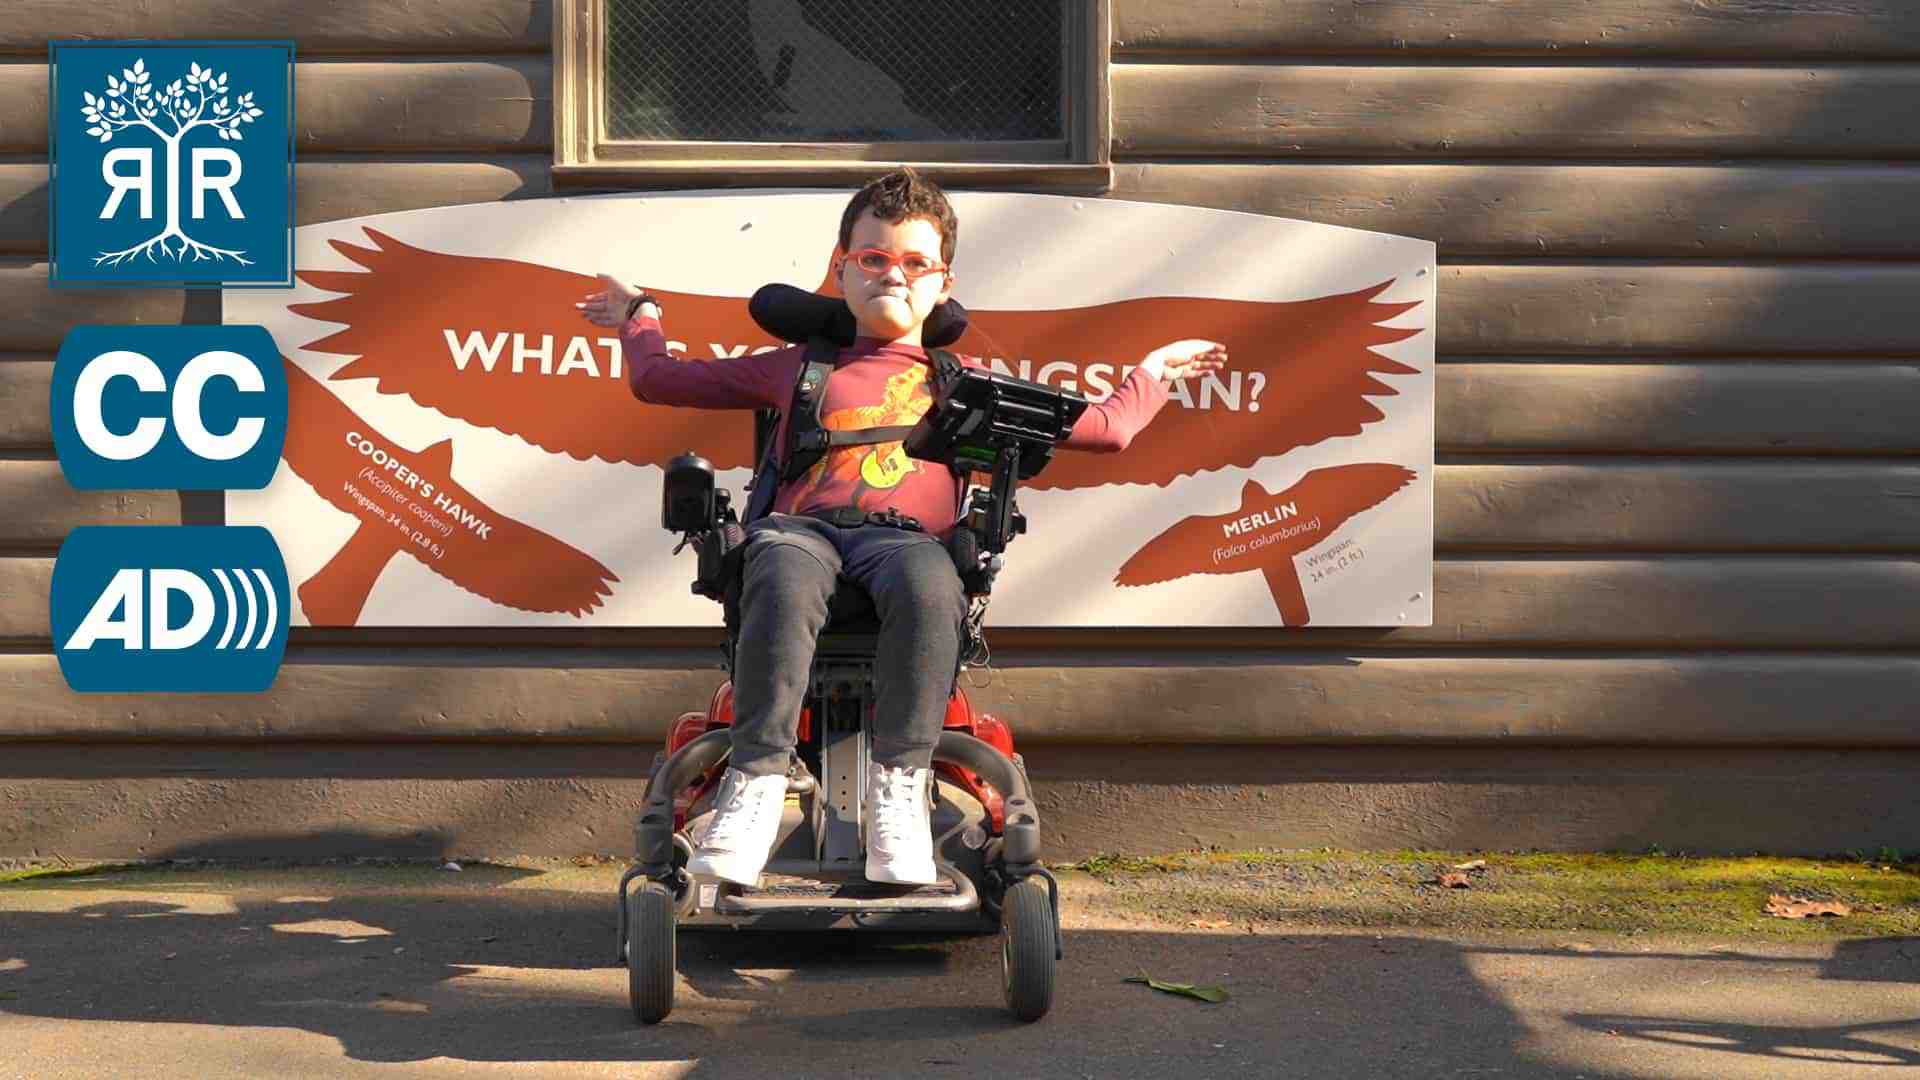 Julian sits in his power chair and raises his arms against a poster of a hawk's wingspan.